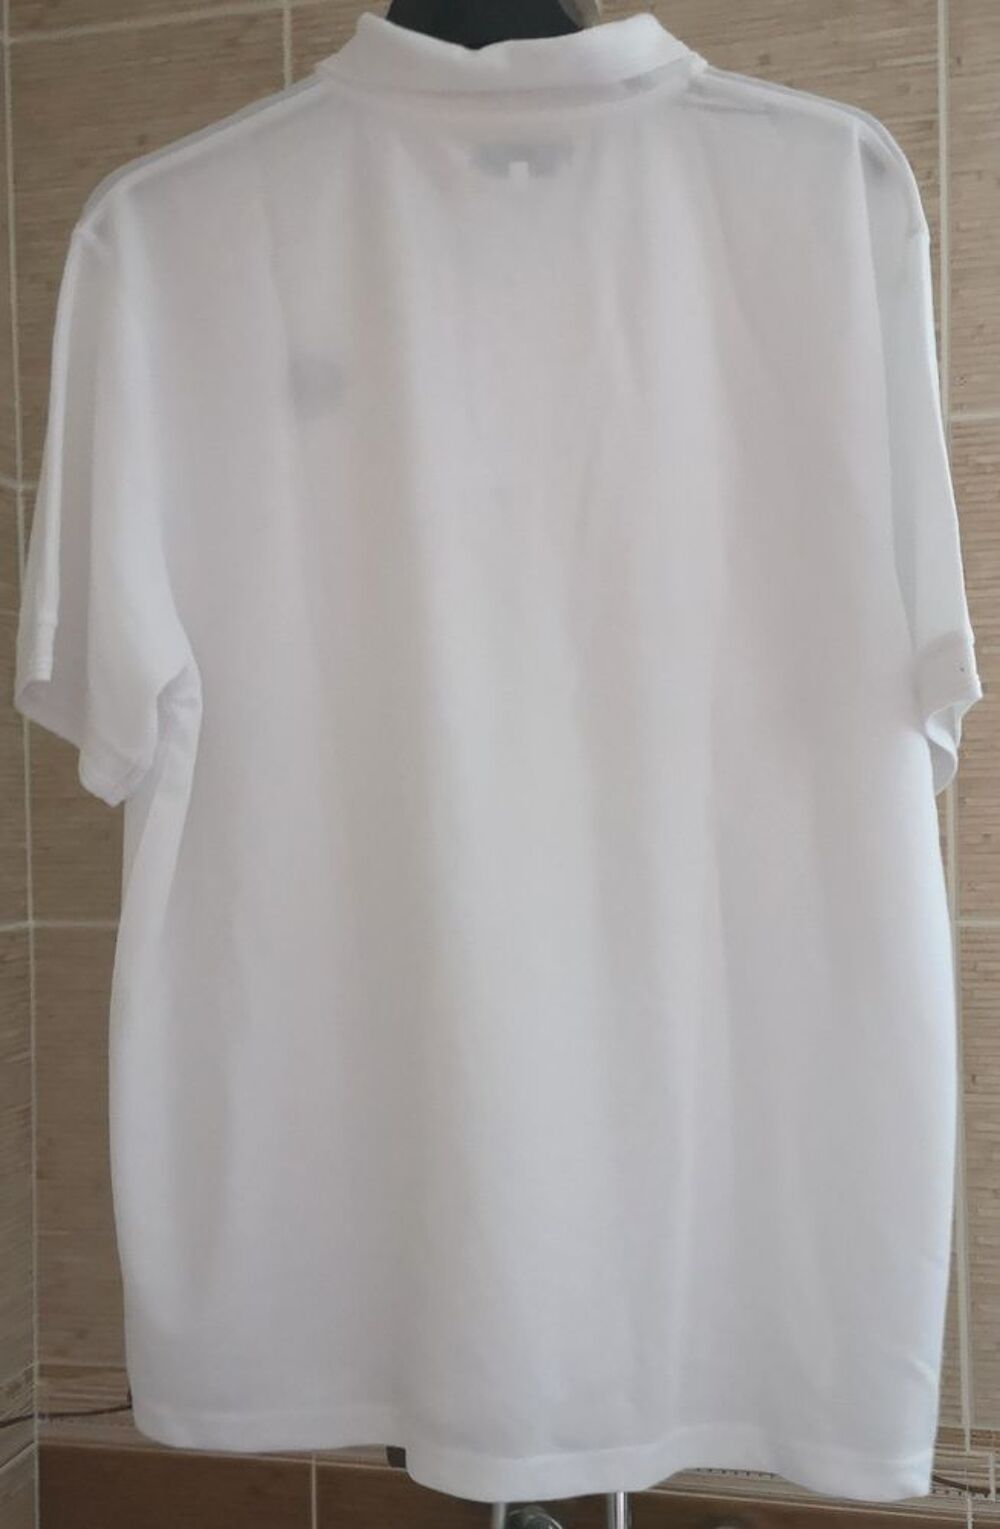 Polo blanc Homme XXL Neuf
Marque Homme Moderne
Vtements